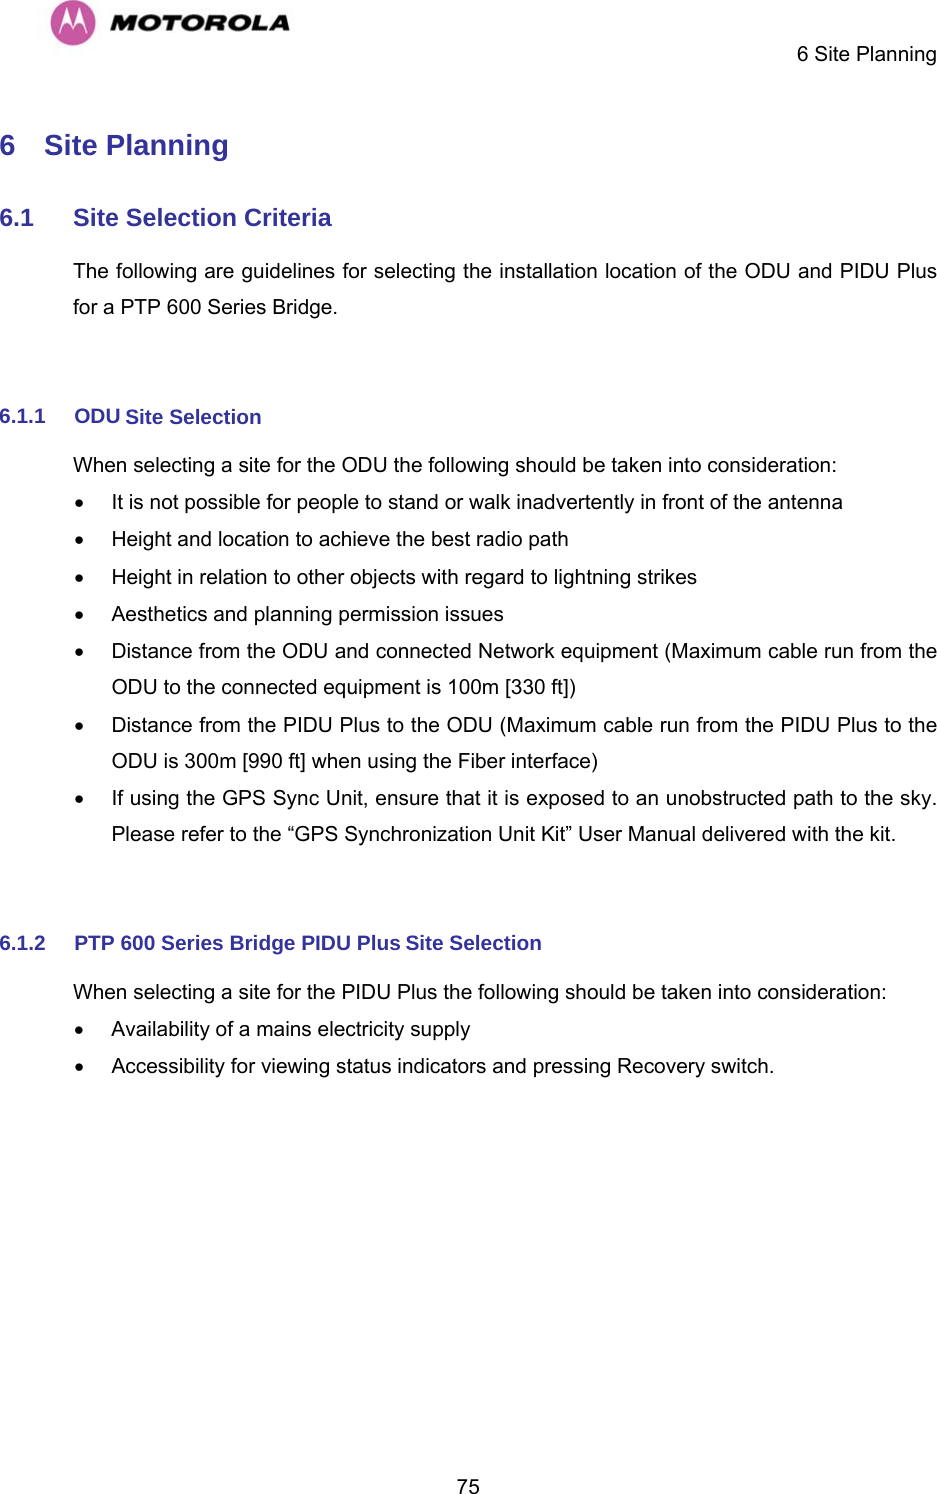     6 Site Planning  756  Site Planning  6.1  Site Selection Criteria  The following are guidelines for selecting the installation location of the ODU and PIDU Plus for a PTP 600 Series Bridge.   6.1.1  ODU Site Selection  When selecting a site for the ODU the following should be taken into consideration:  •  It is not possible for people to stand or walk inadvertently in front of the antenna  •  Height and location to achieve the best radio path  •  Height in relation to other objects with regard to lightning strikes  •  Aesthetics and planning permission issues  •  Distance from the ODU and connected Network equipment (Maximum cable run from the ODU to the connected equipment is 100m [330 ft])  •  Distance from the PIDU Plus to the ODU (Maximum cable run from the PIDU Plus to the ODU is 300m [990 ft] when using the Fiber interface)  •  If using the GPS Sync Unit, ensure that it is exposed to an unobstructed path to the sky. Please refer to the “GPS Synchronization Unit Kit” User Manual delivered with the kit.  6.1.2  PTP 600 Series Bridge PIDU Plus Site Selection  When selecting a site for the PIDU Plus the following should be taken into consideration:  •  Availability of a mains electricity supply  •  Accessibility for viewing status indicators and pressing Recovery switch.  